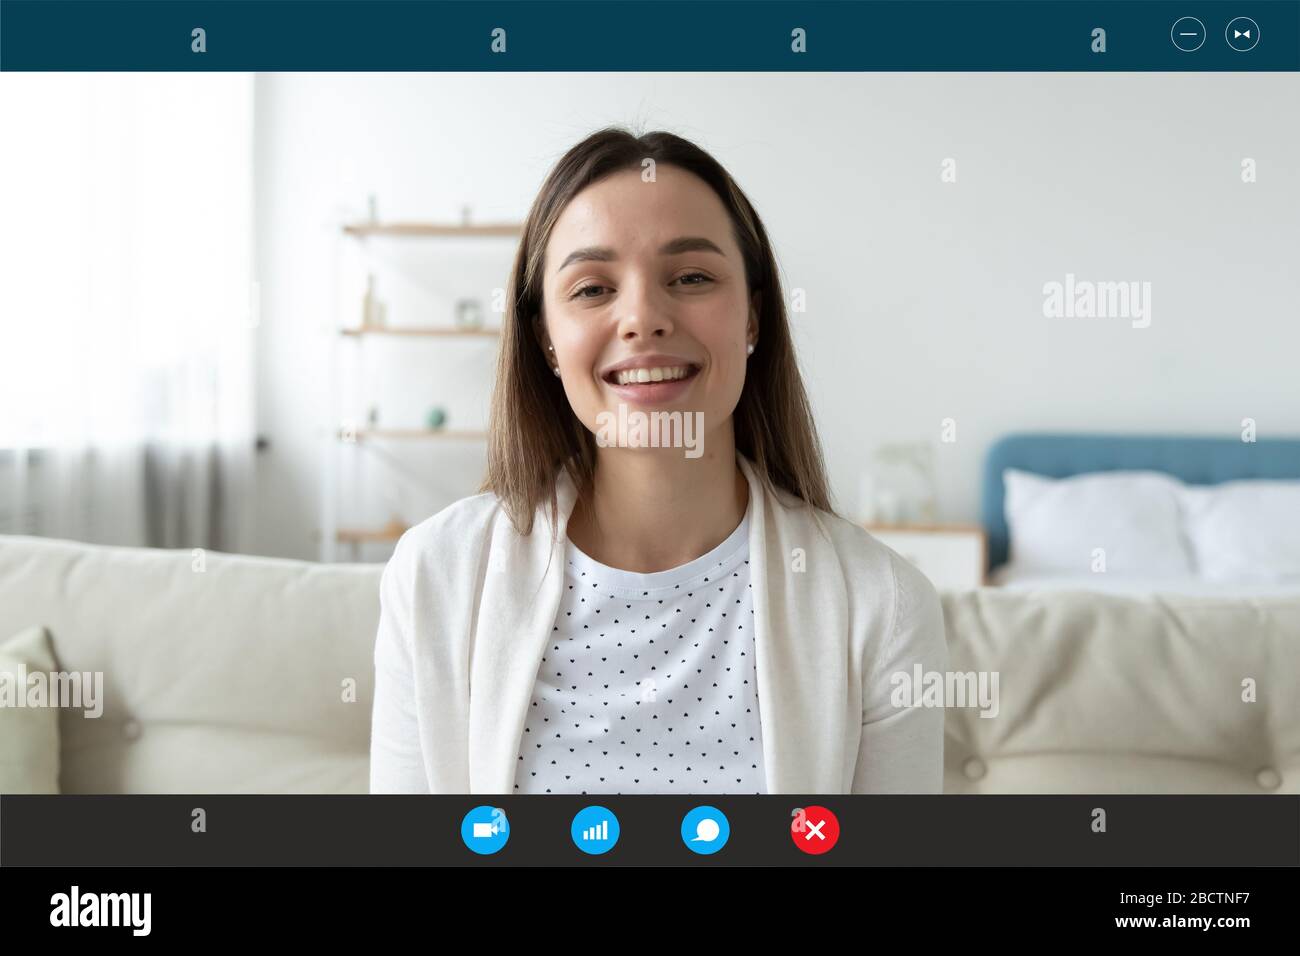 Female psychologist provide psychological support to patient distantly by videocall Stock Photo